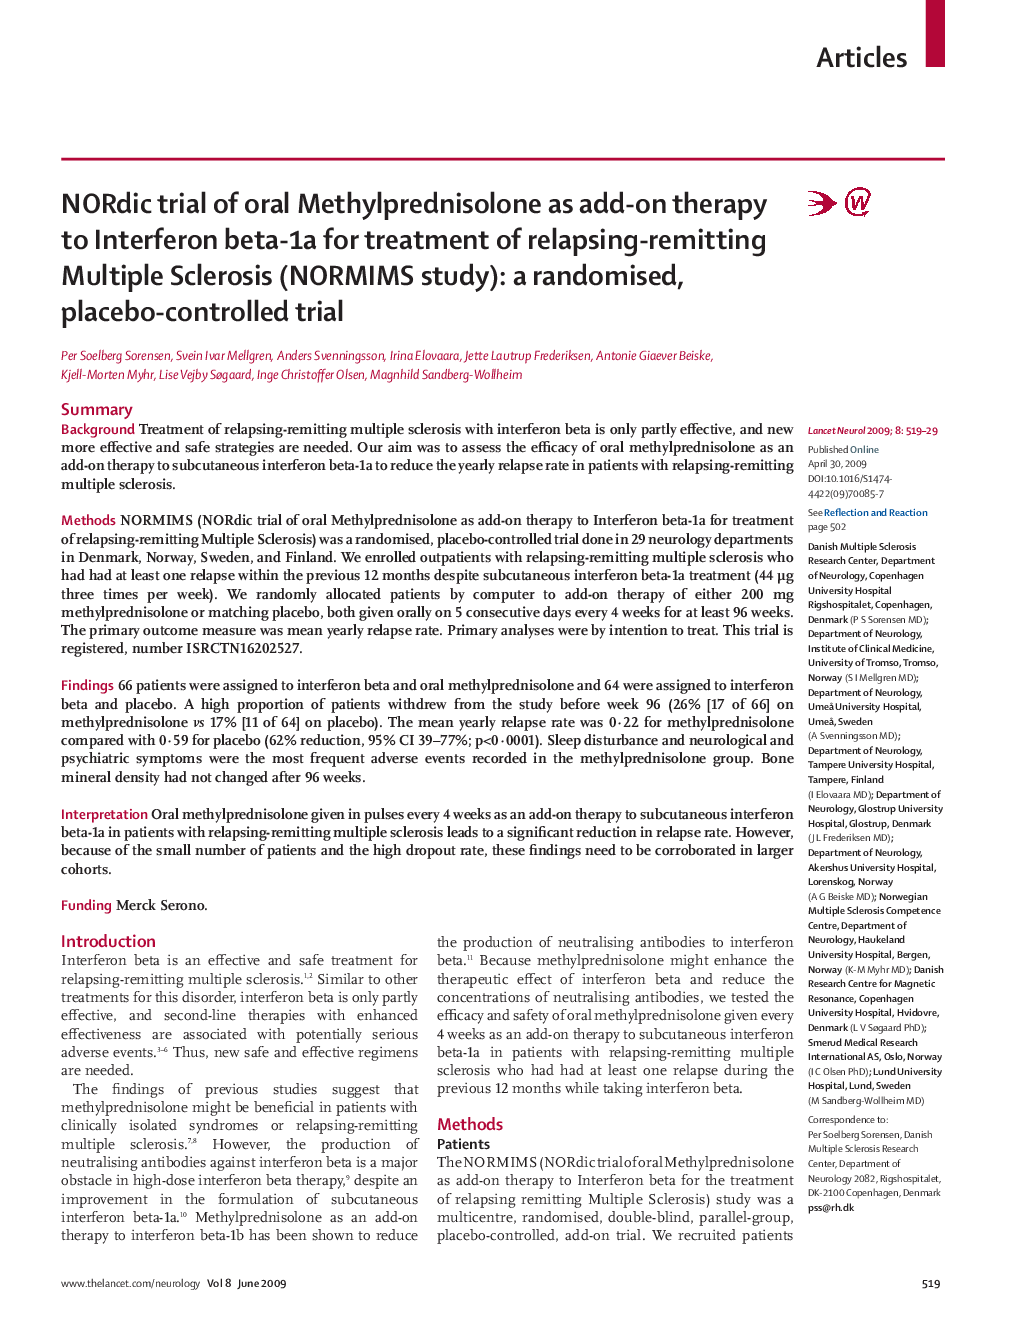 NORdic trial of oral Methylprednisolone as add-on therapy to Interferon beta-1a for treatment of relapsing-remitting Multiple Sclerosis (NORMIMS study): a randomised, placebo-controlled trial